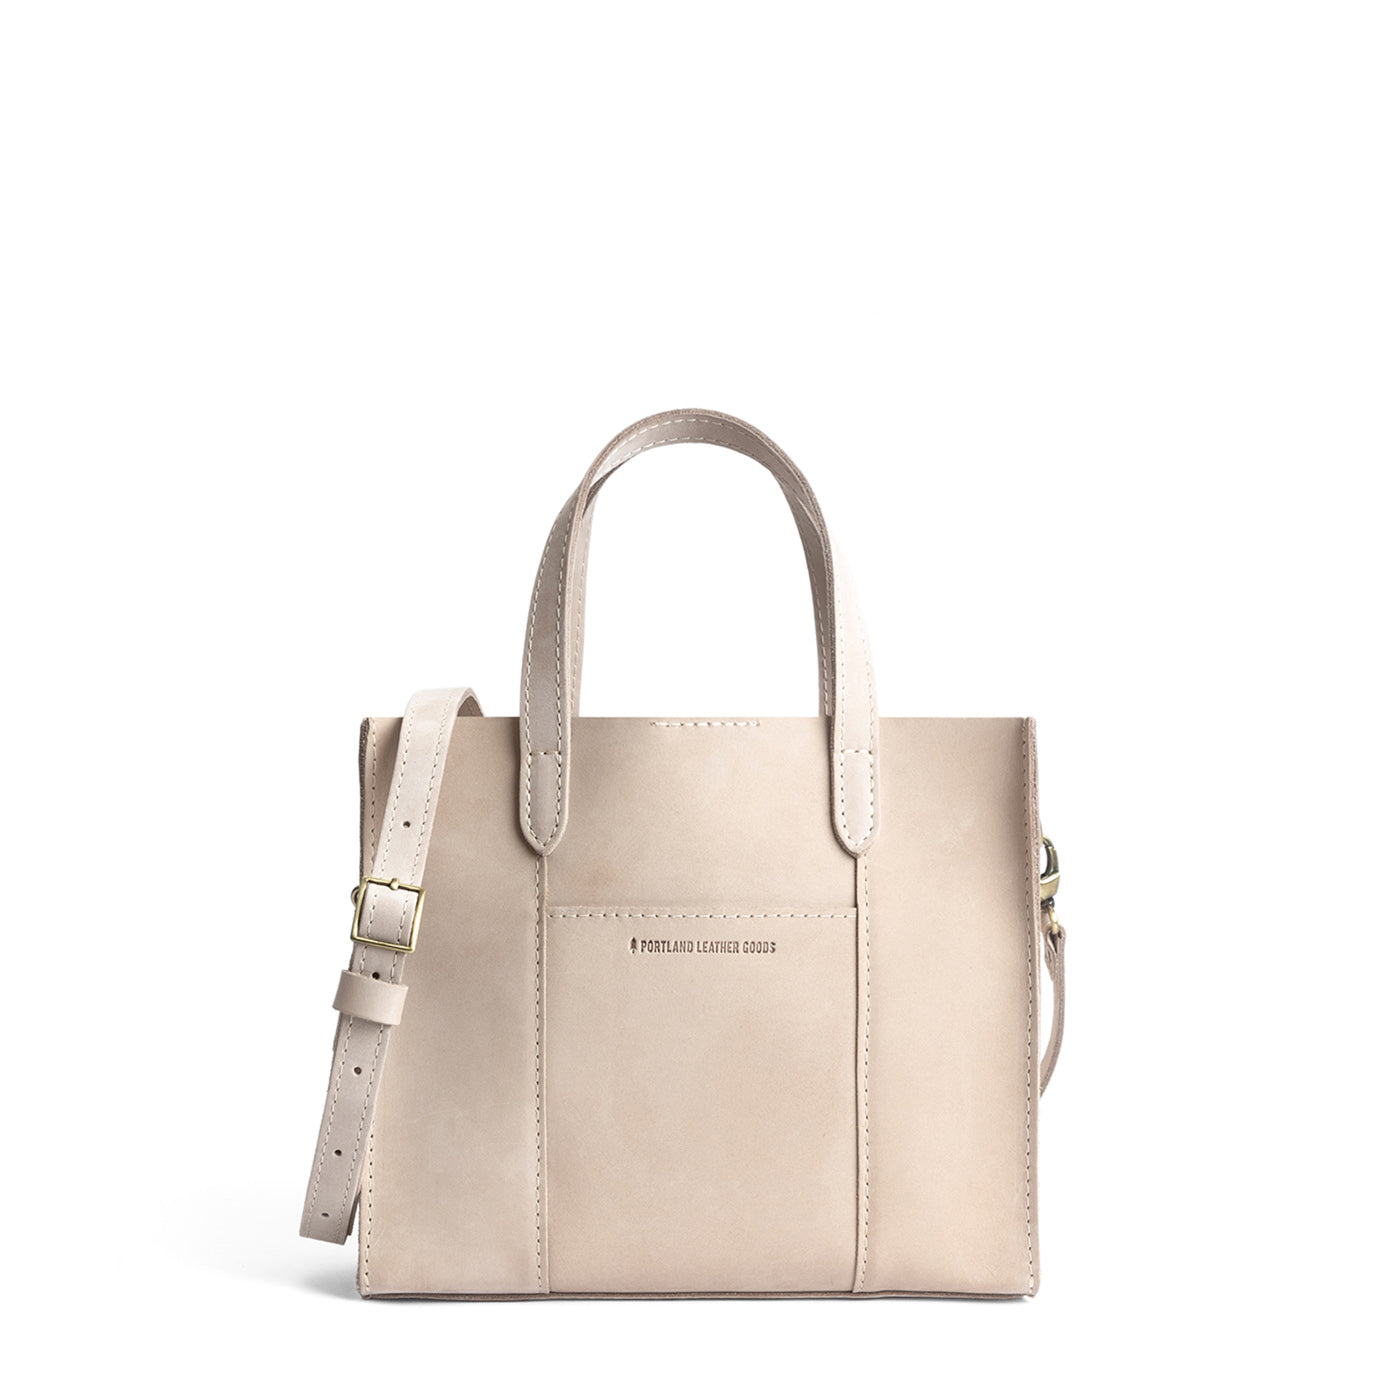 Dragon Bone | Structured mid-size tote bag with overlapping panels and crossbody strap